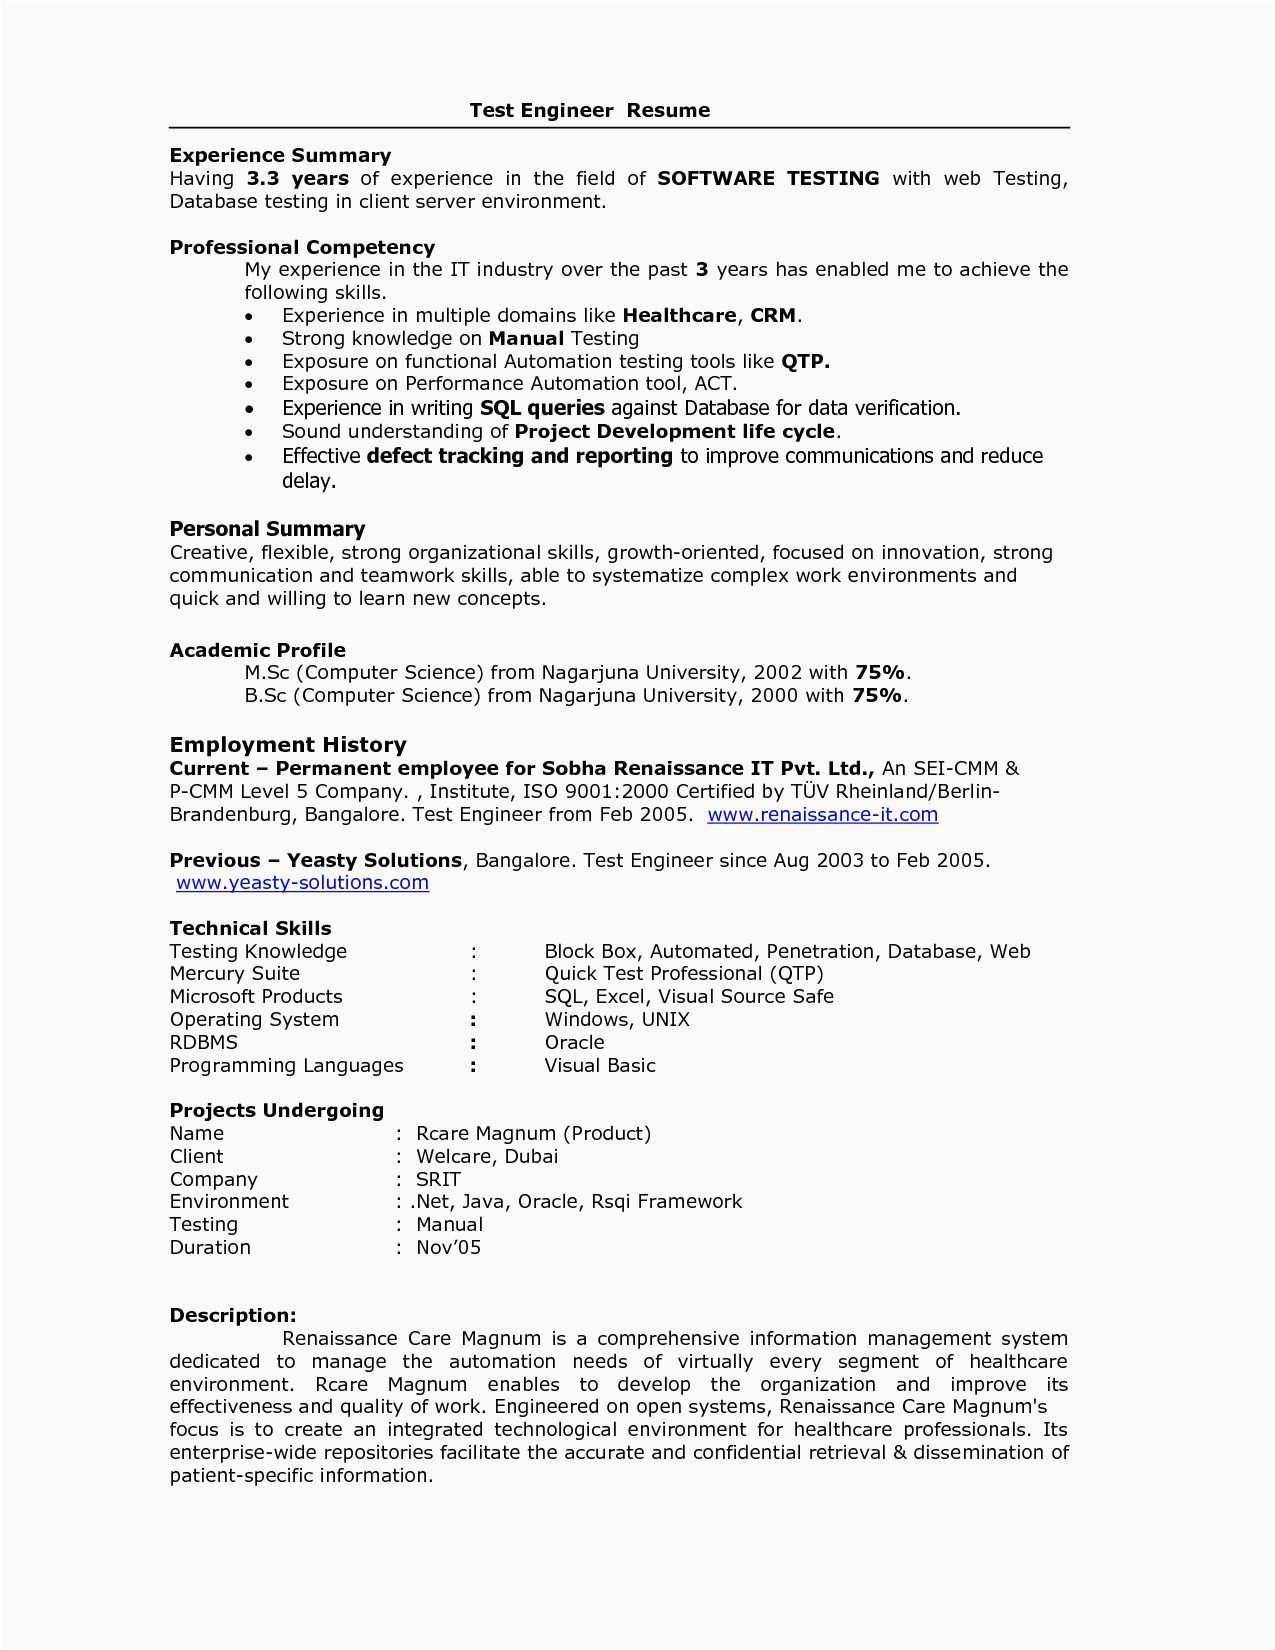 Software Testing Resume Samples for 3 Years Experience 5 Years Testing Experience